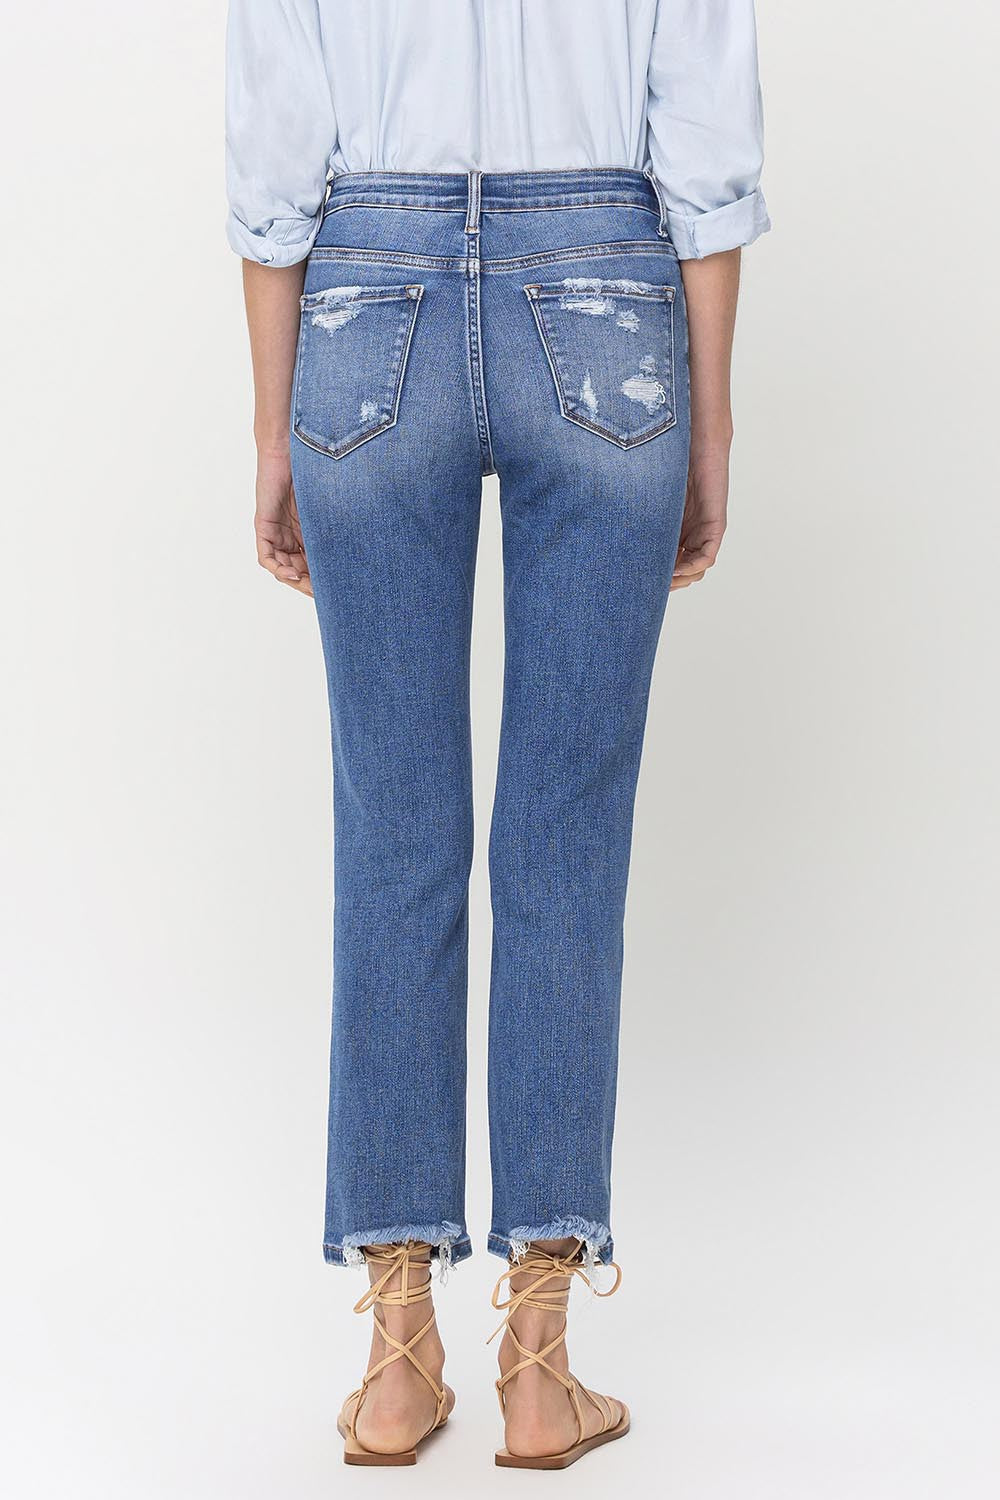 The High Rise Raw Hem Straight Jeans are a stylish and versatile choice. With their high-rise fit, they provide a flattering silhouette. The raw hem adds a trendy and edgy touch to any outfit. Made from high-quality denim, they are durable and comfortable to wear. These jeans are perfect for both casual and dressier occasions.  24 - 32